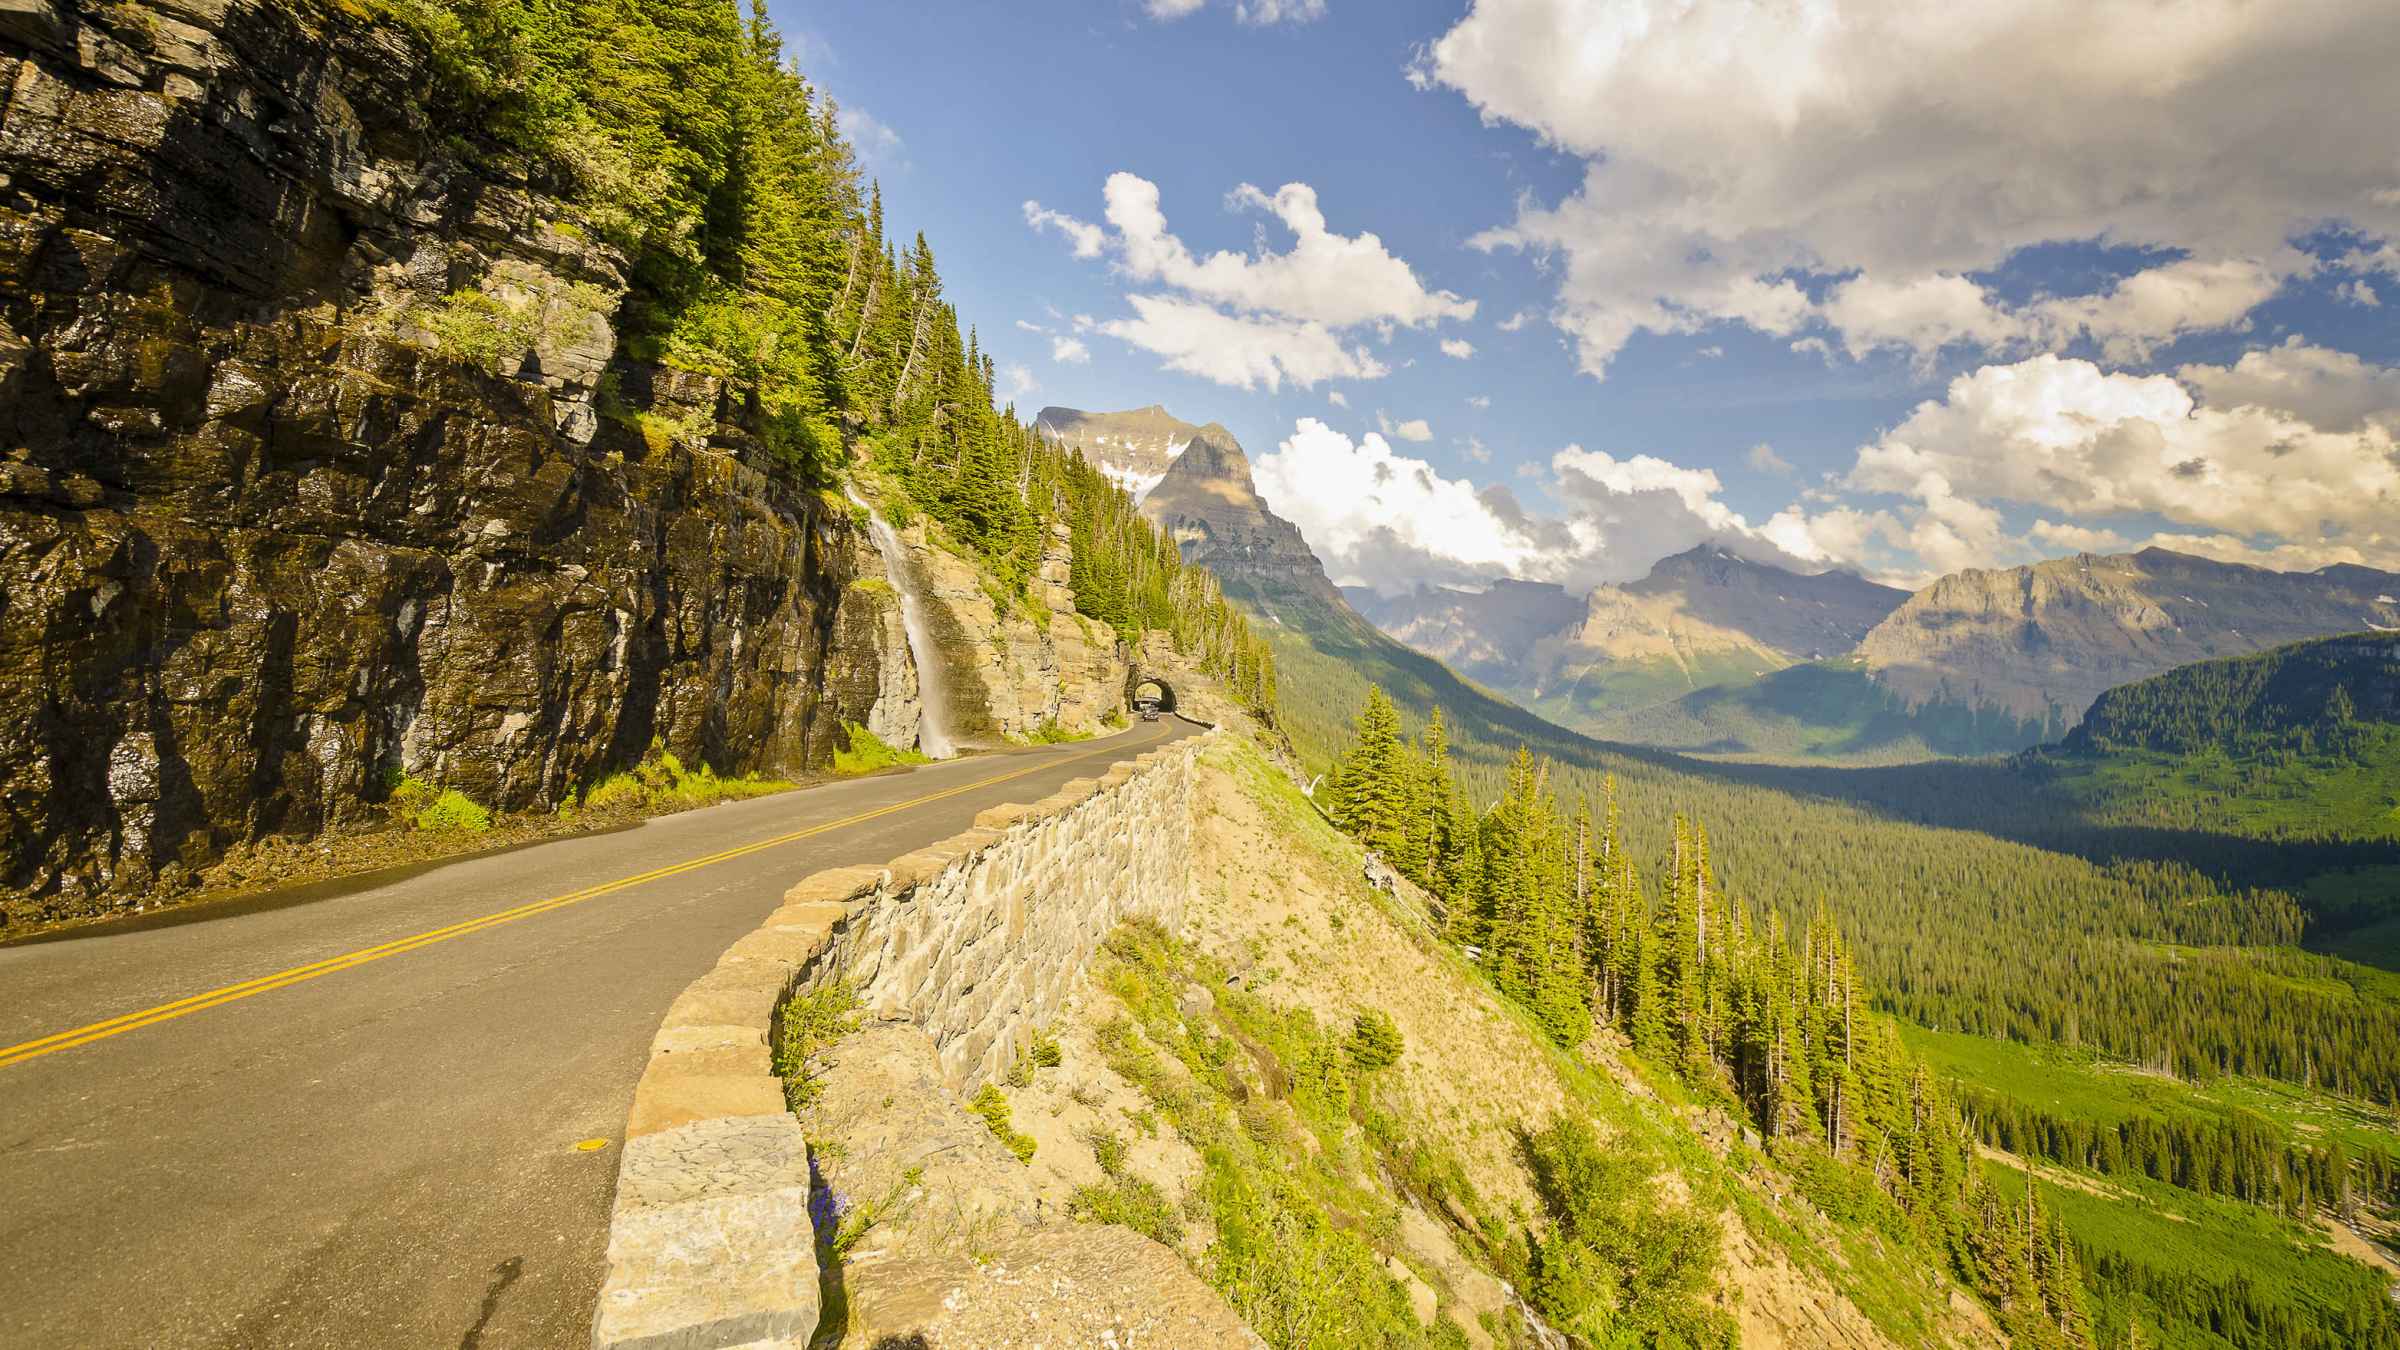 Going-to-the-Sun Road, - Book Tickets & Tours | GetYourGuide.com